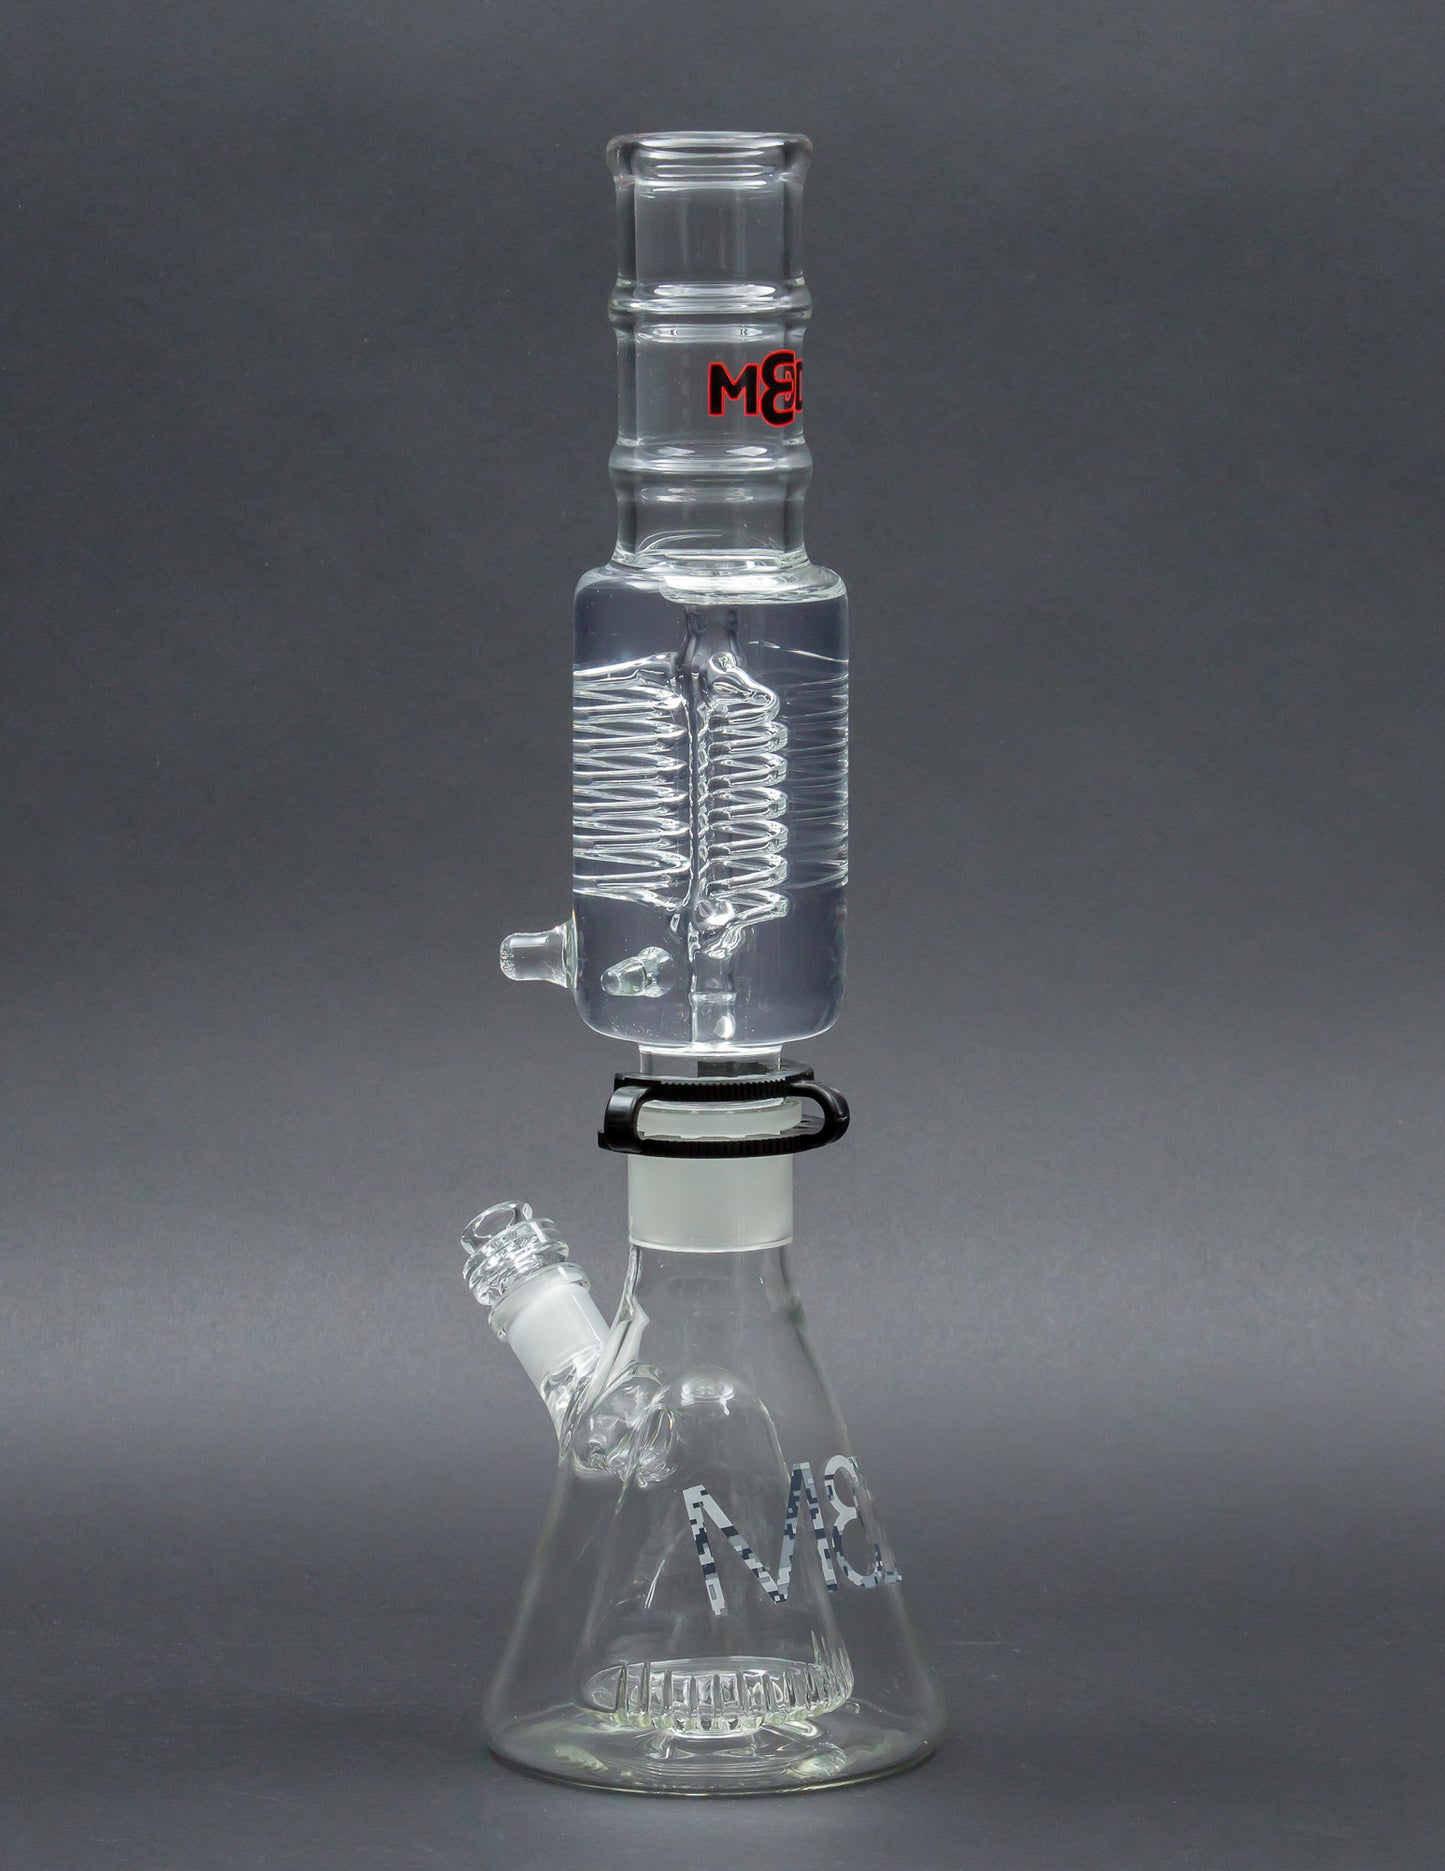 3MD Large Bi-coil with Clear Glycerin Beaker Base